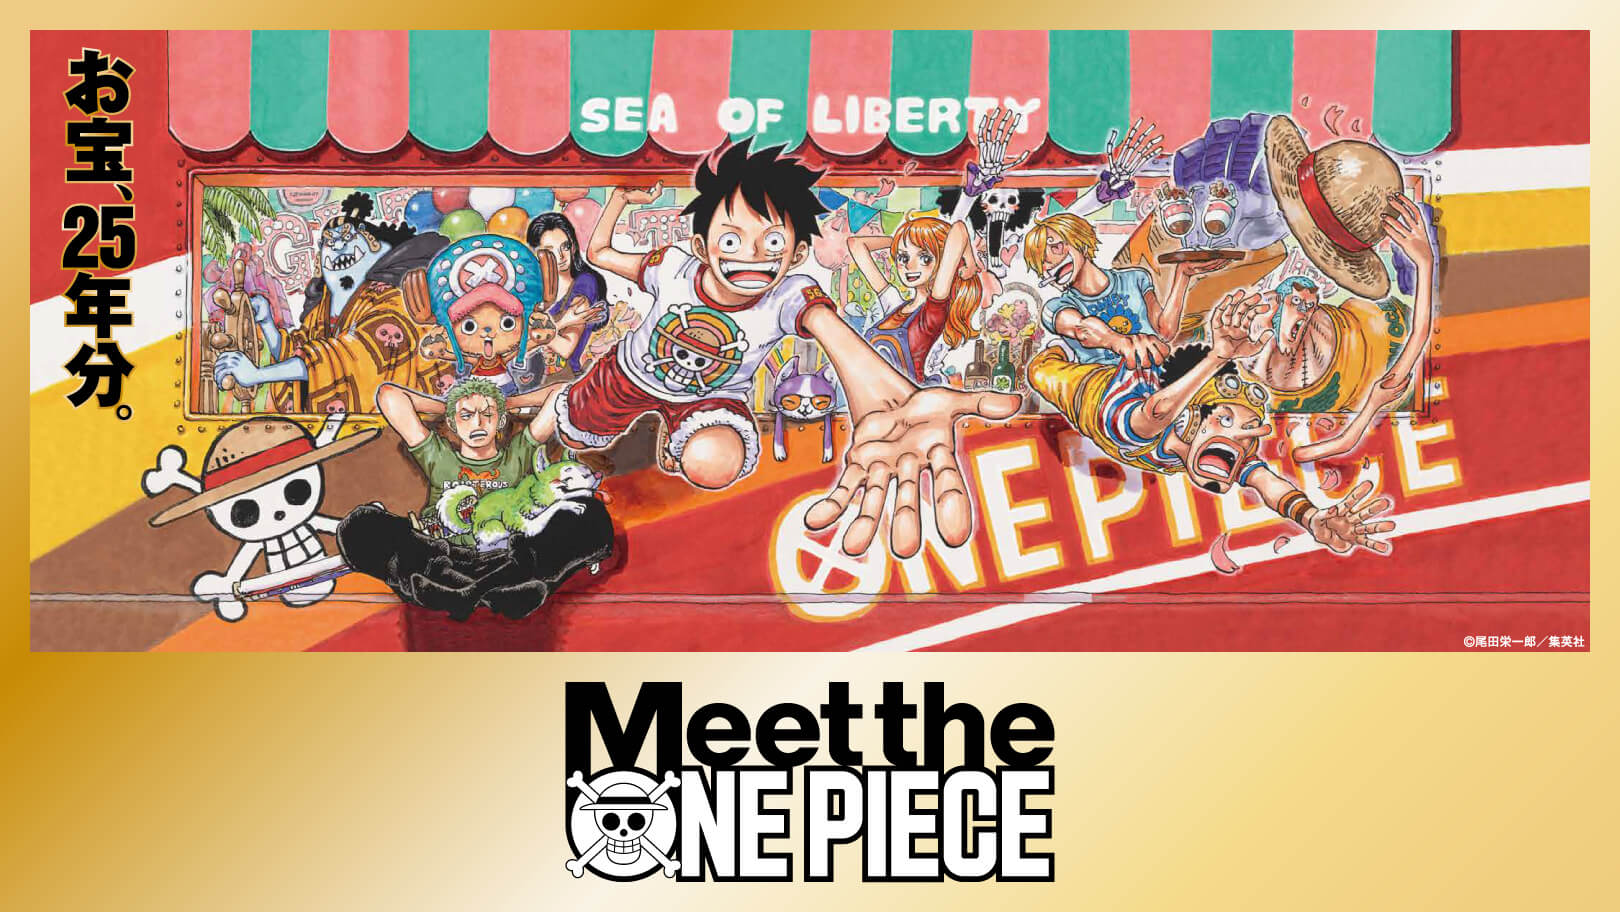 Puzzle & Dragons JP x One Piece Film Red Collab Starts on